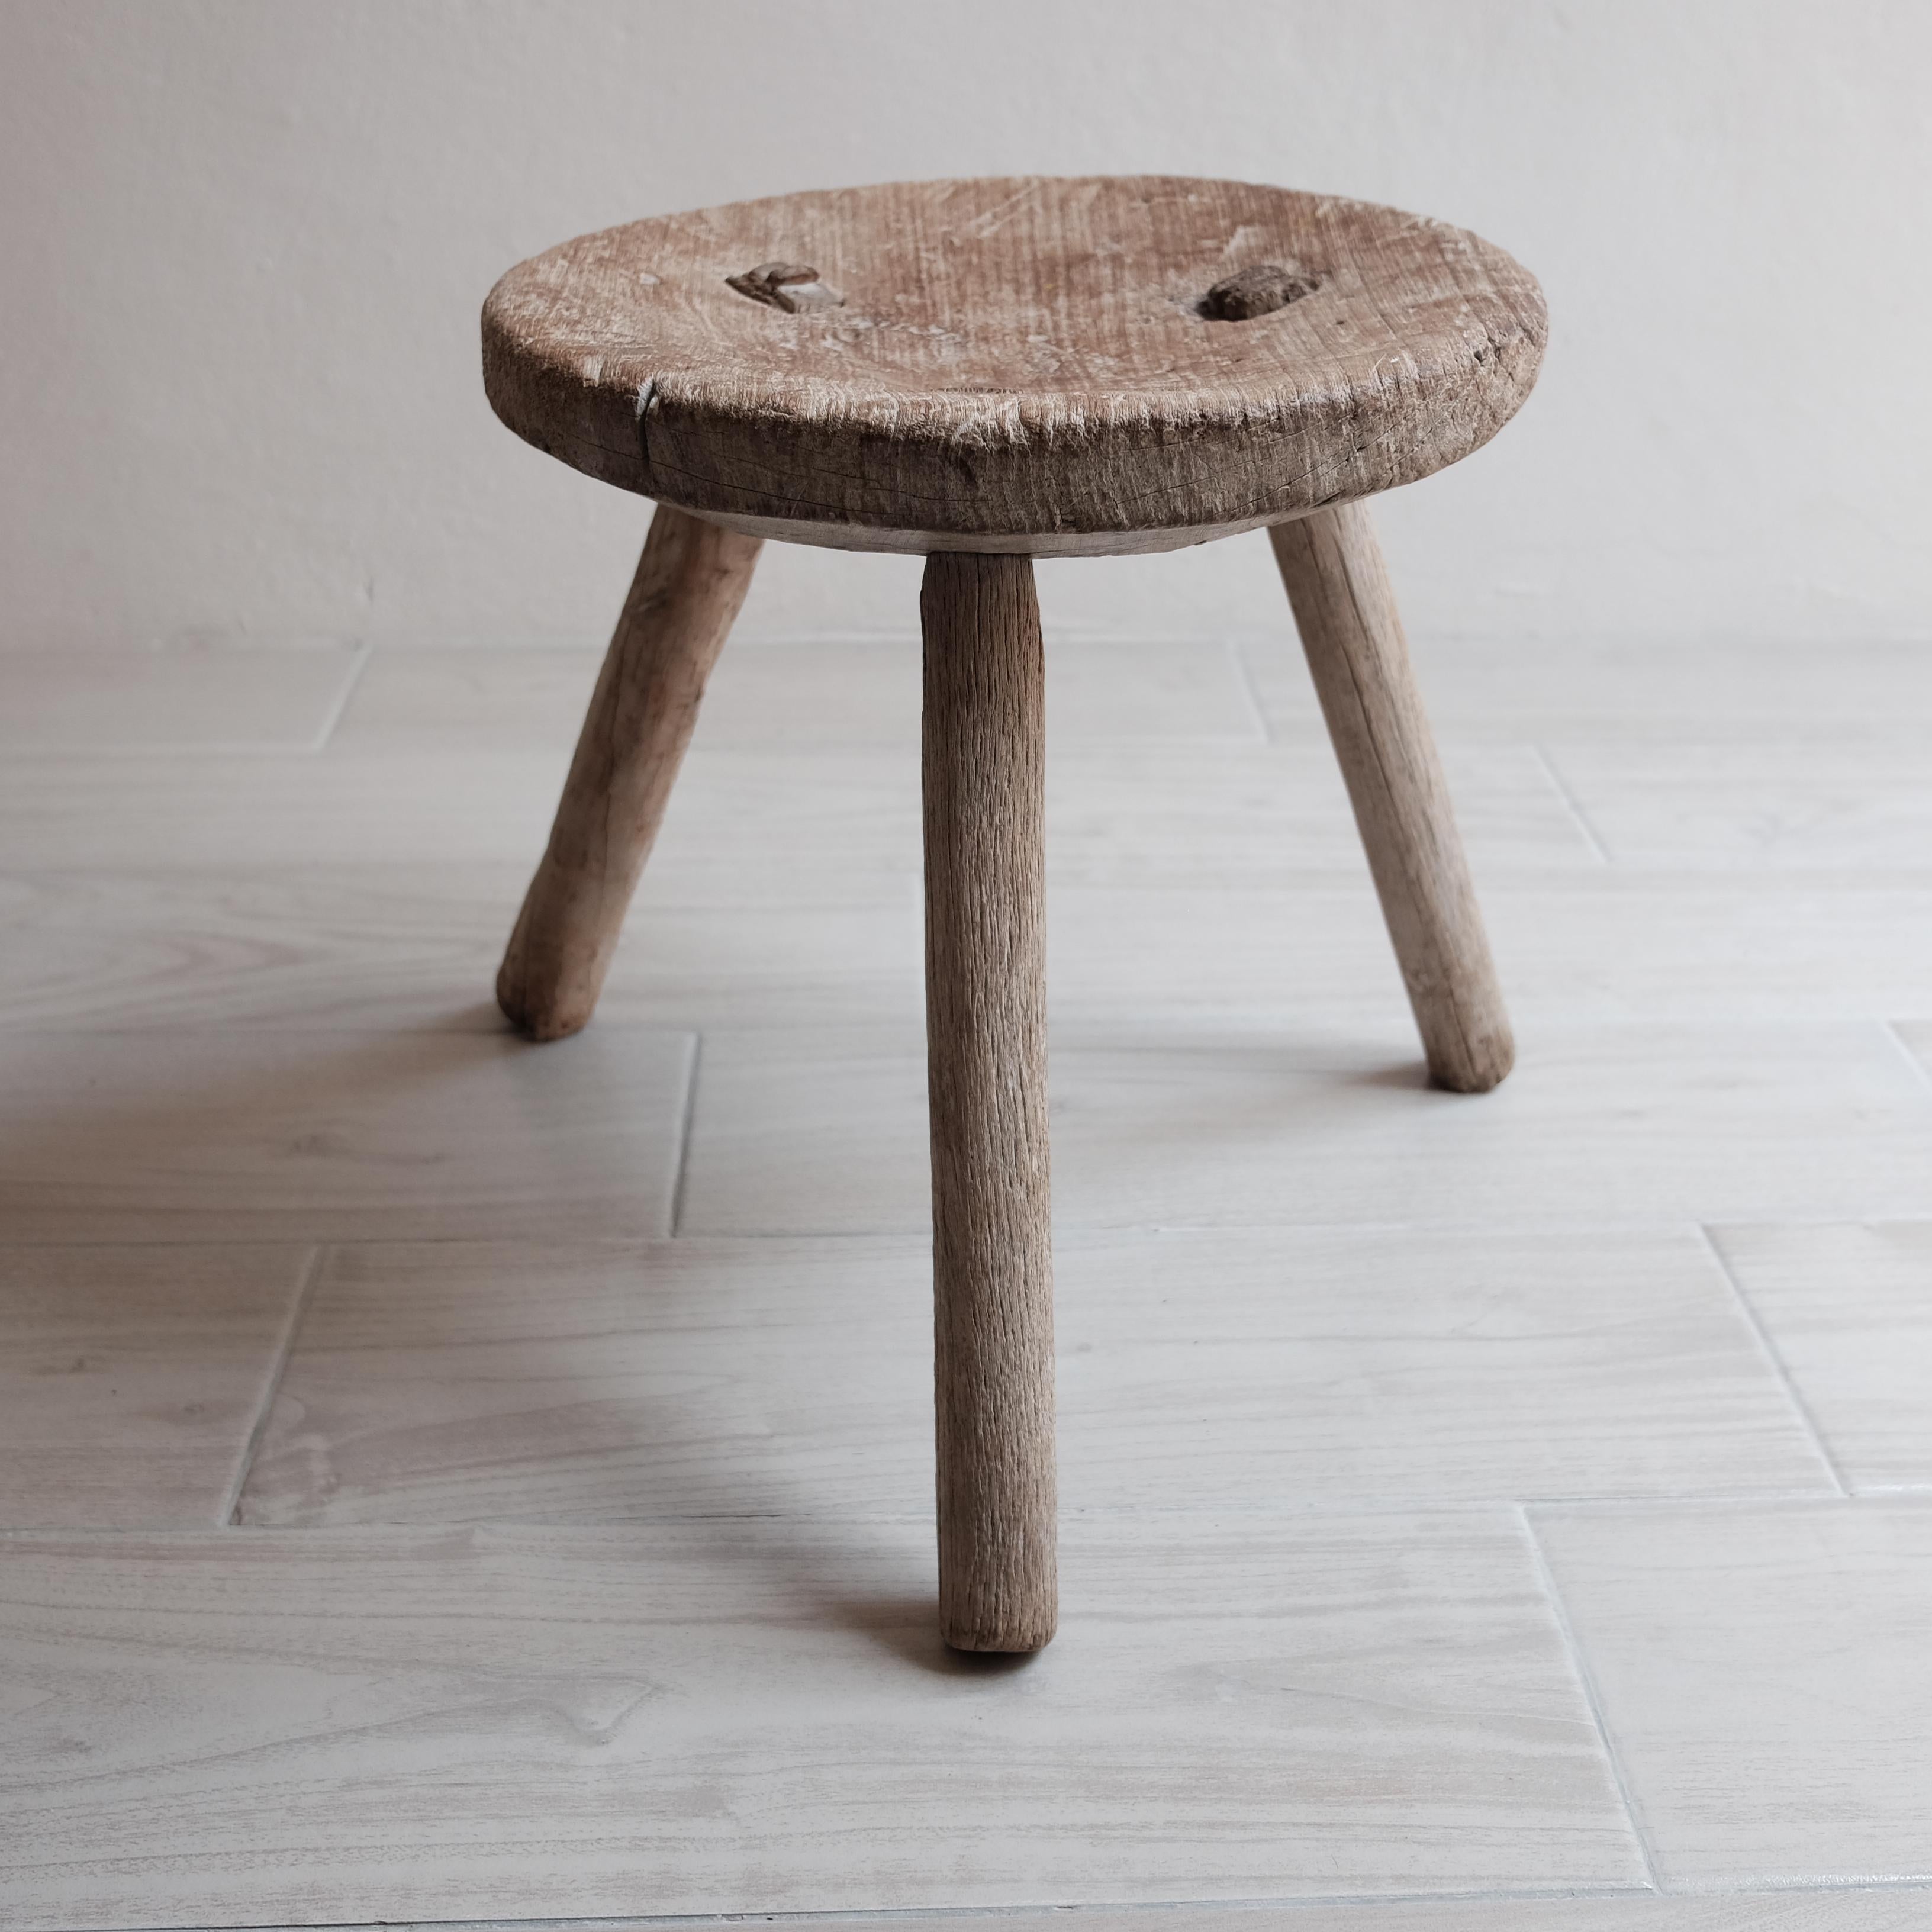 Rustic Mesquite Stool from Mexico, 1960s